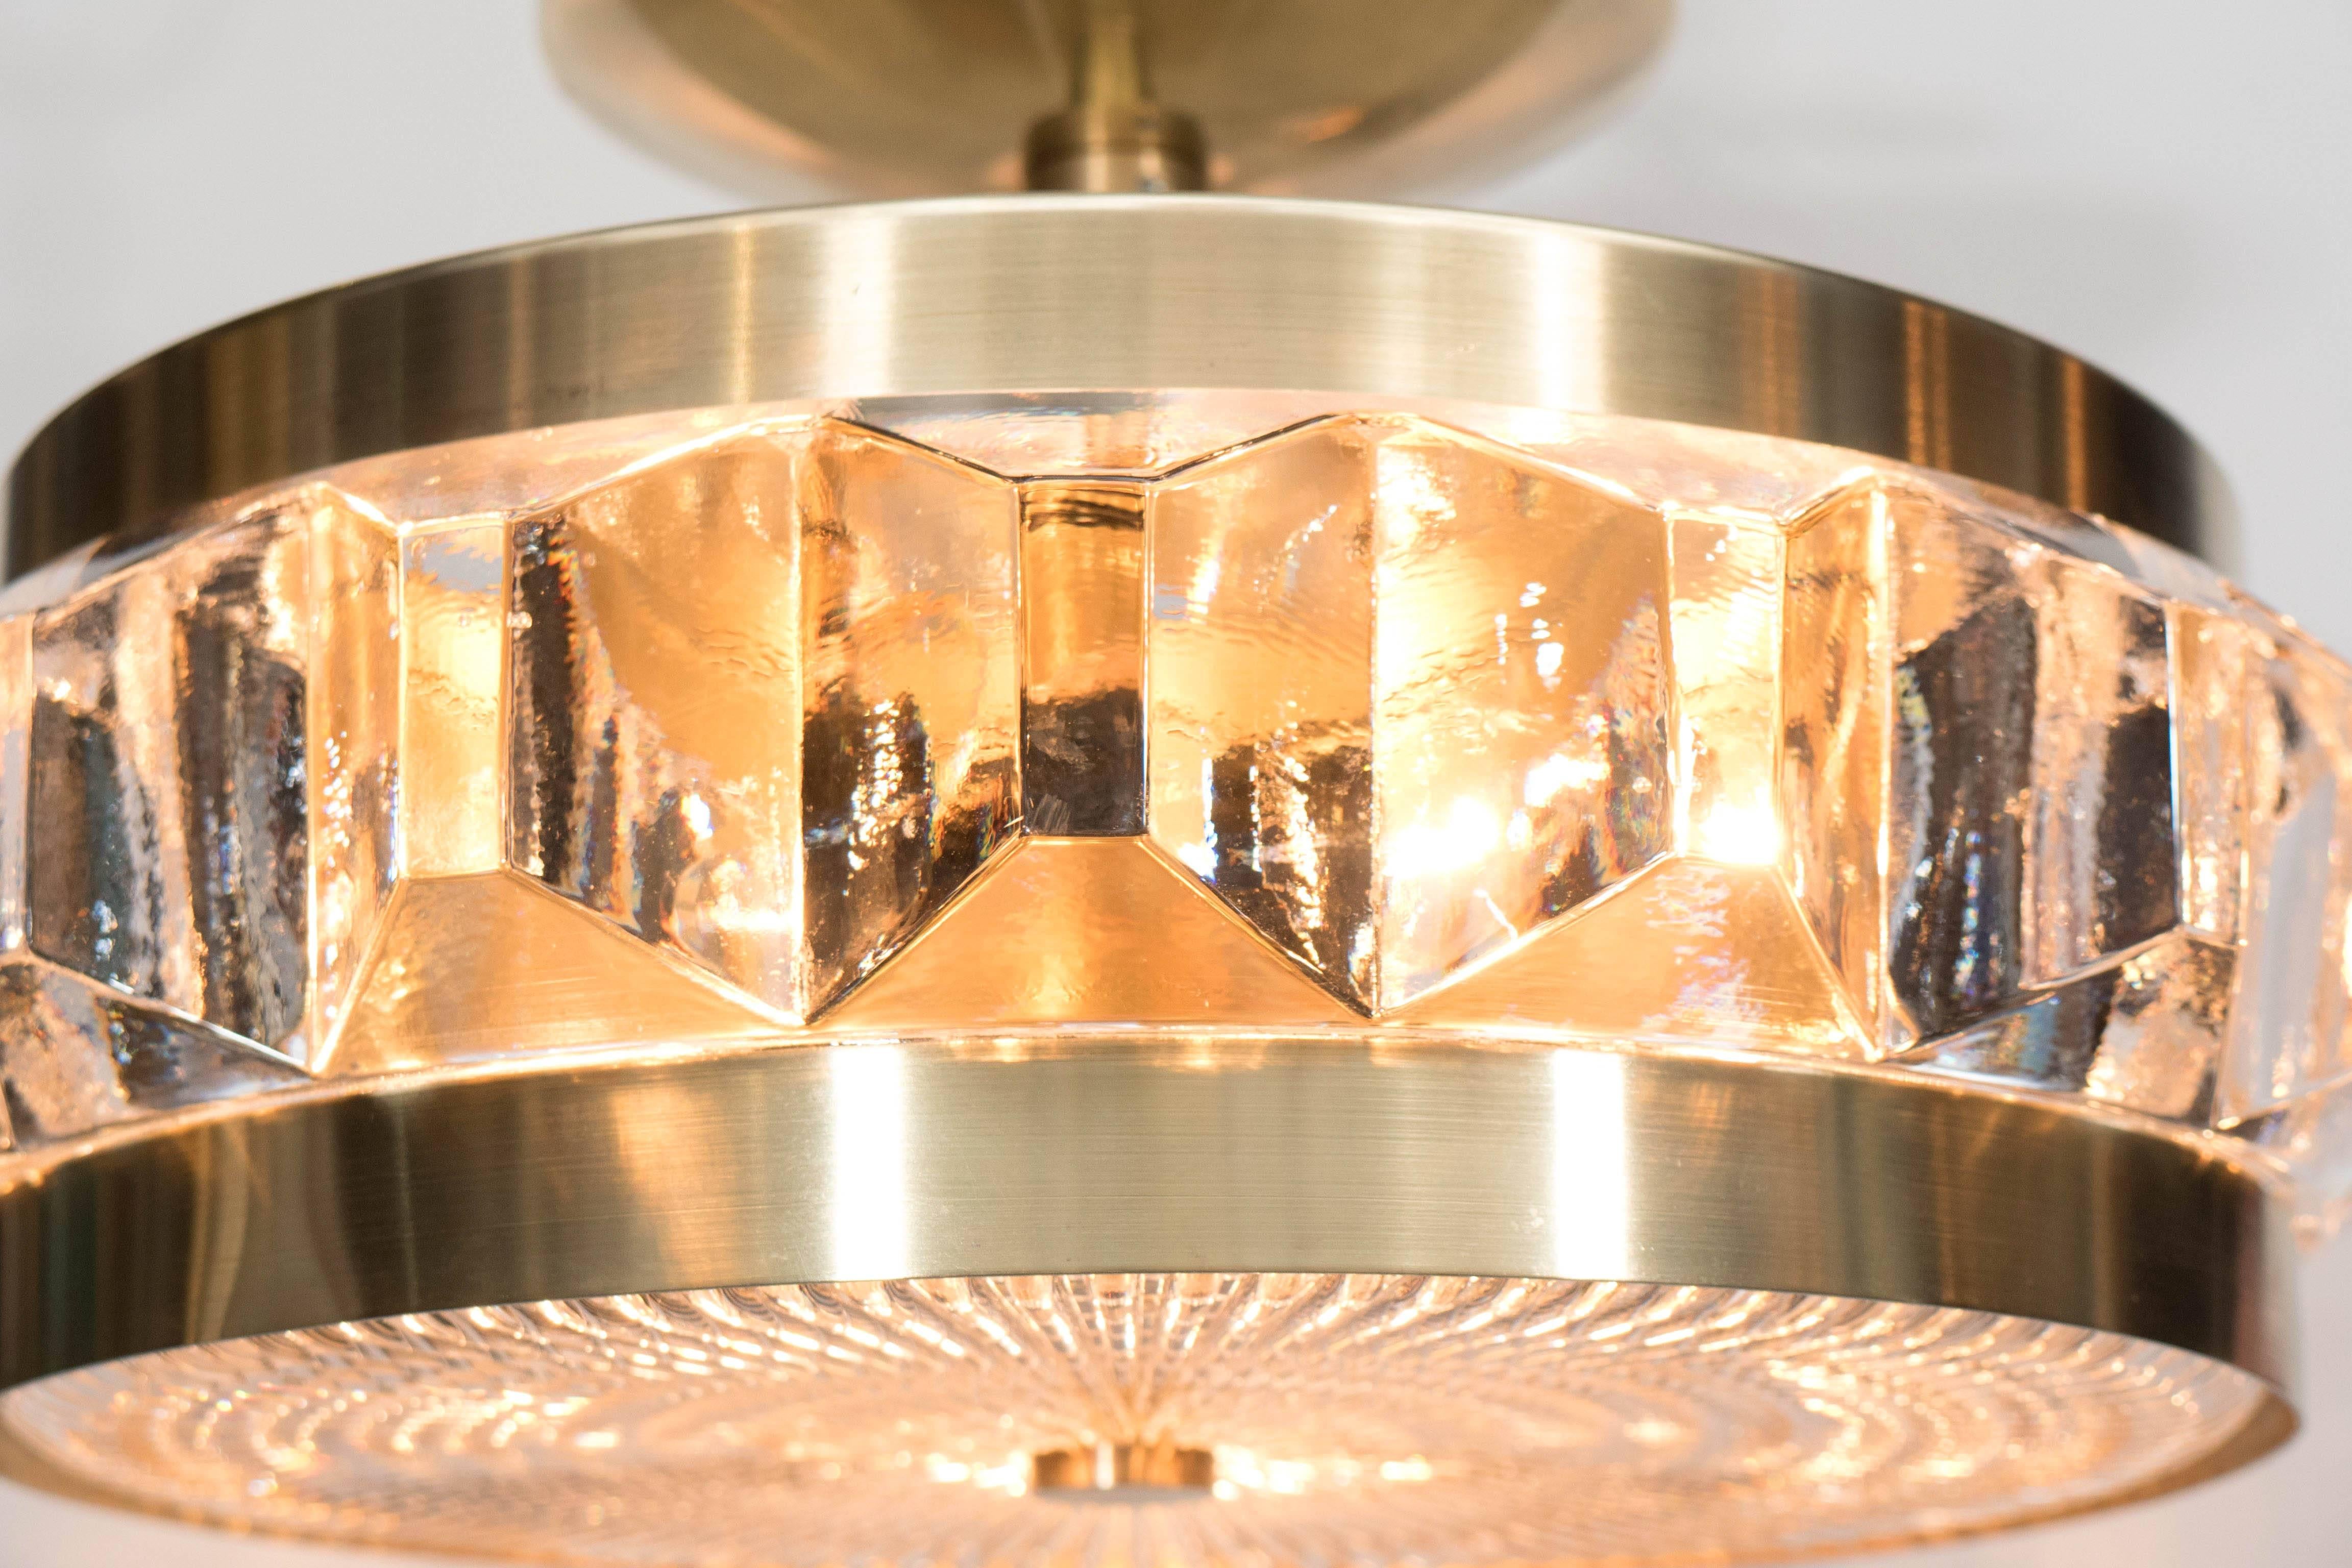 Mid-Century Modern Flush Mount Chandelier with Textured Glass and Brass Fittings by Orrefors